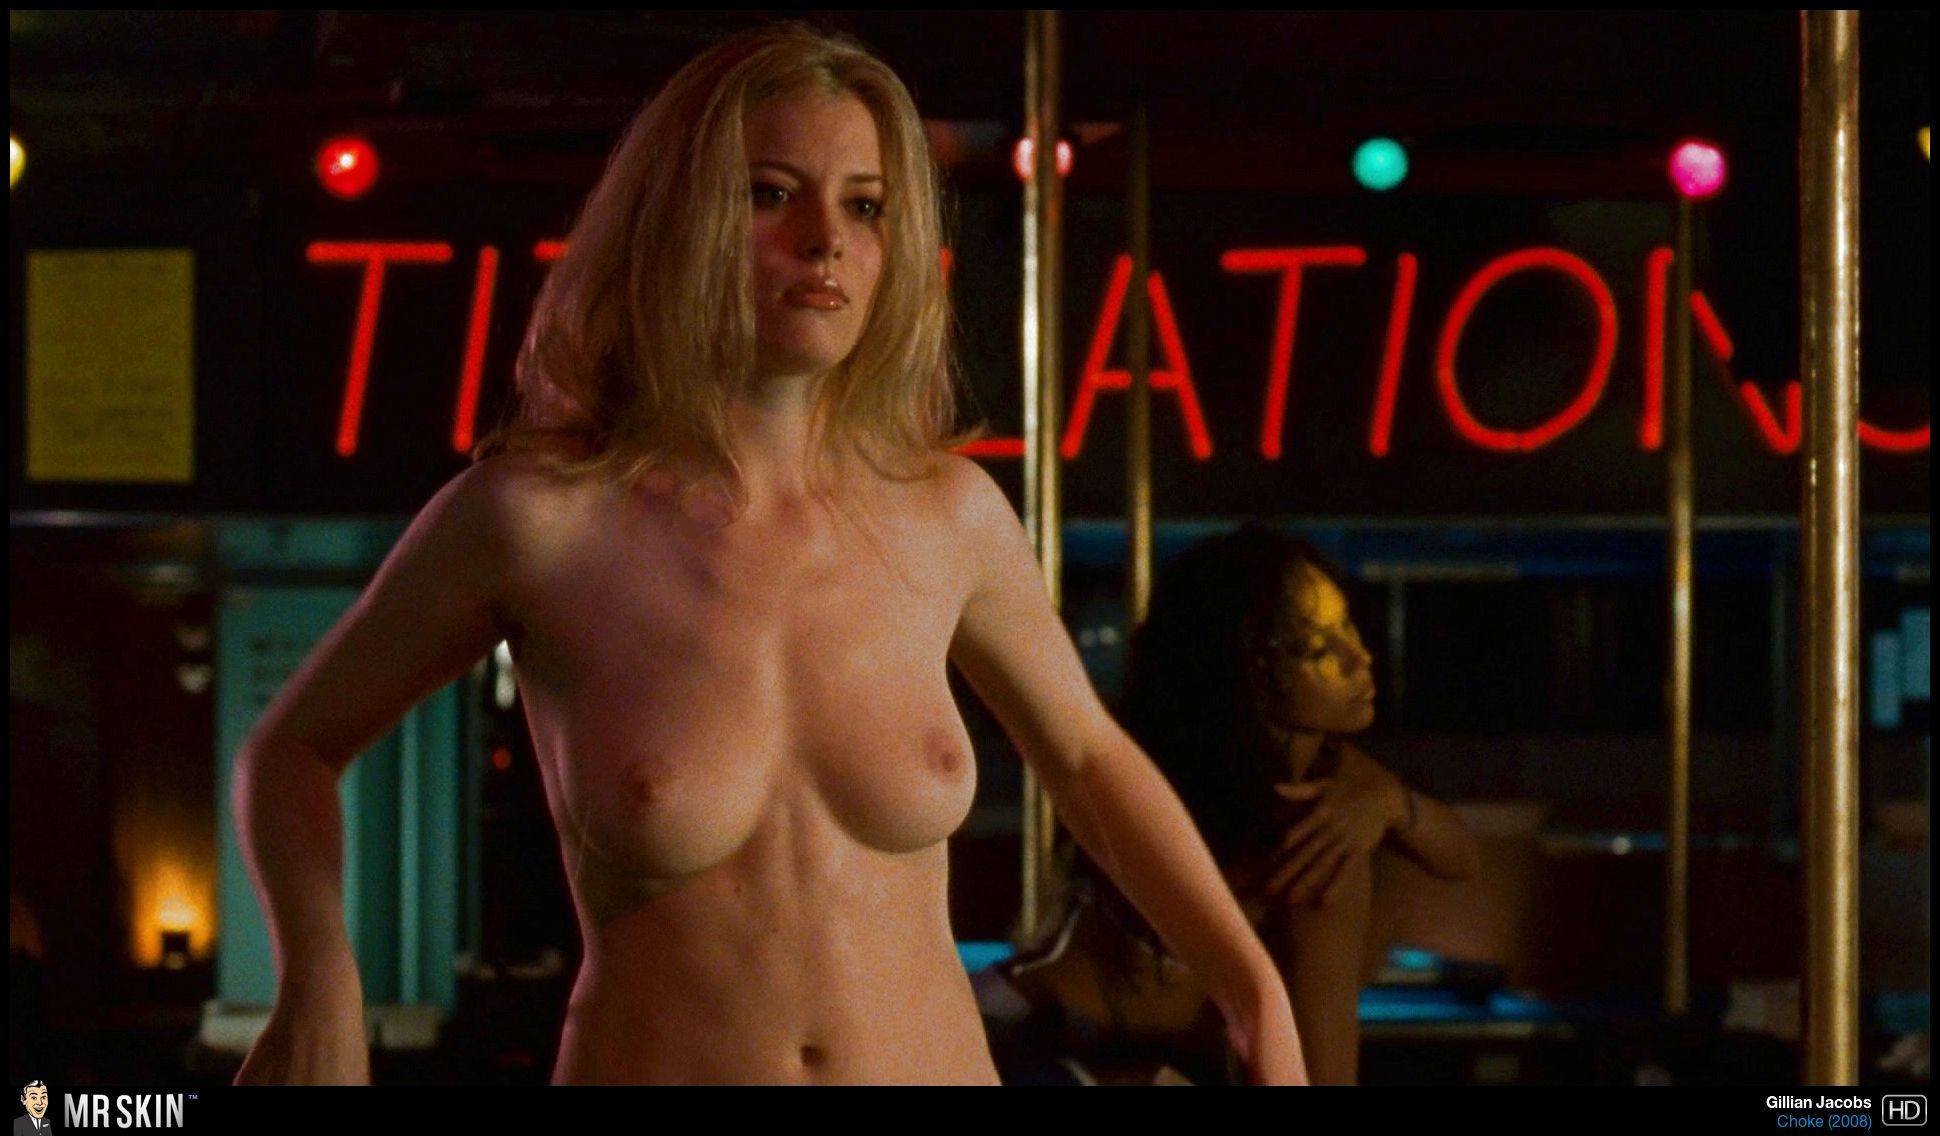 brian still recommends gillian jacobs tits pic